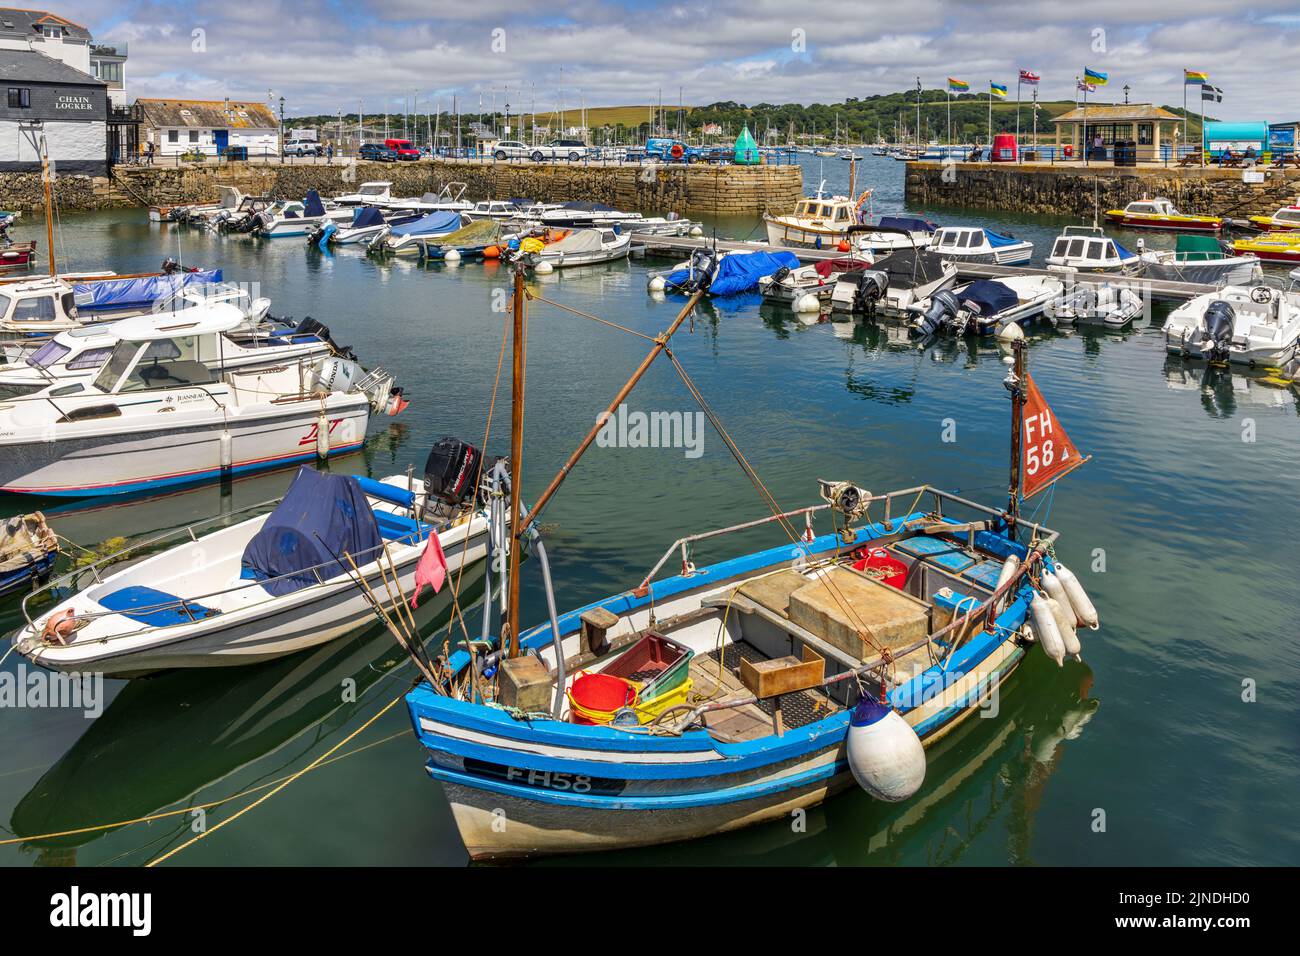 Boats in the harbour at Falmouth, Cornwall, England. Stock Photo